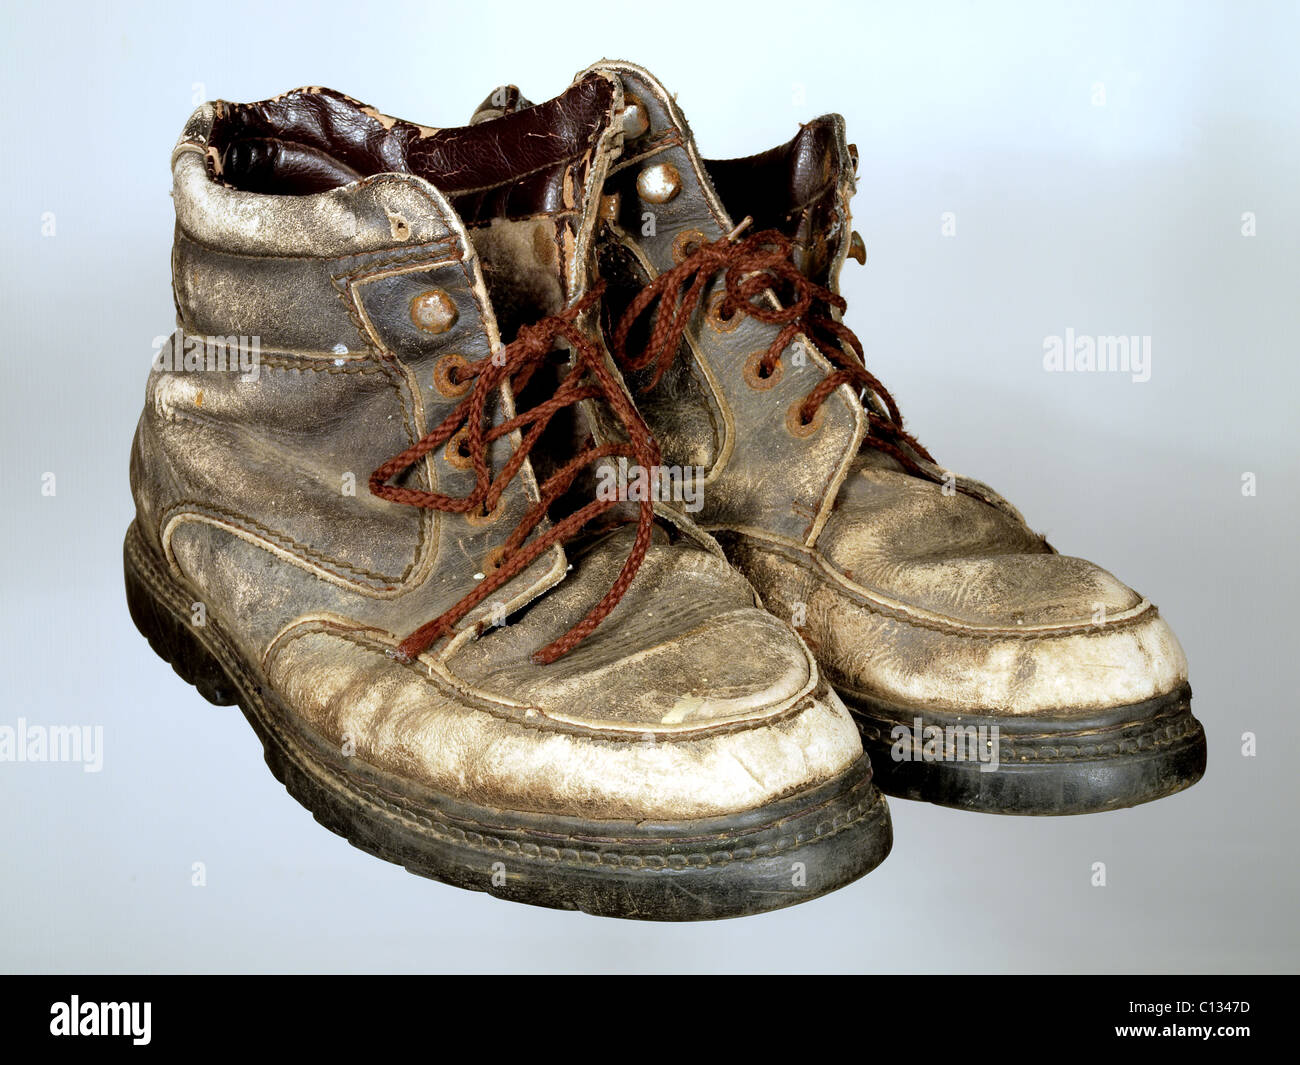 Battered Boots High Resolution Stock Photography and Images - Alamy